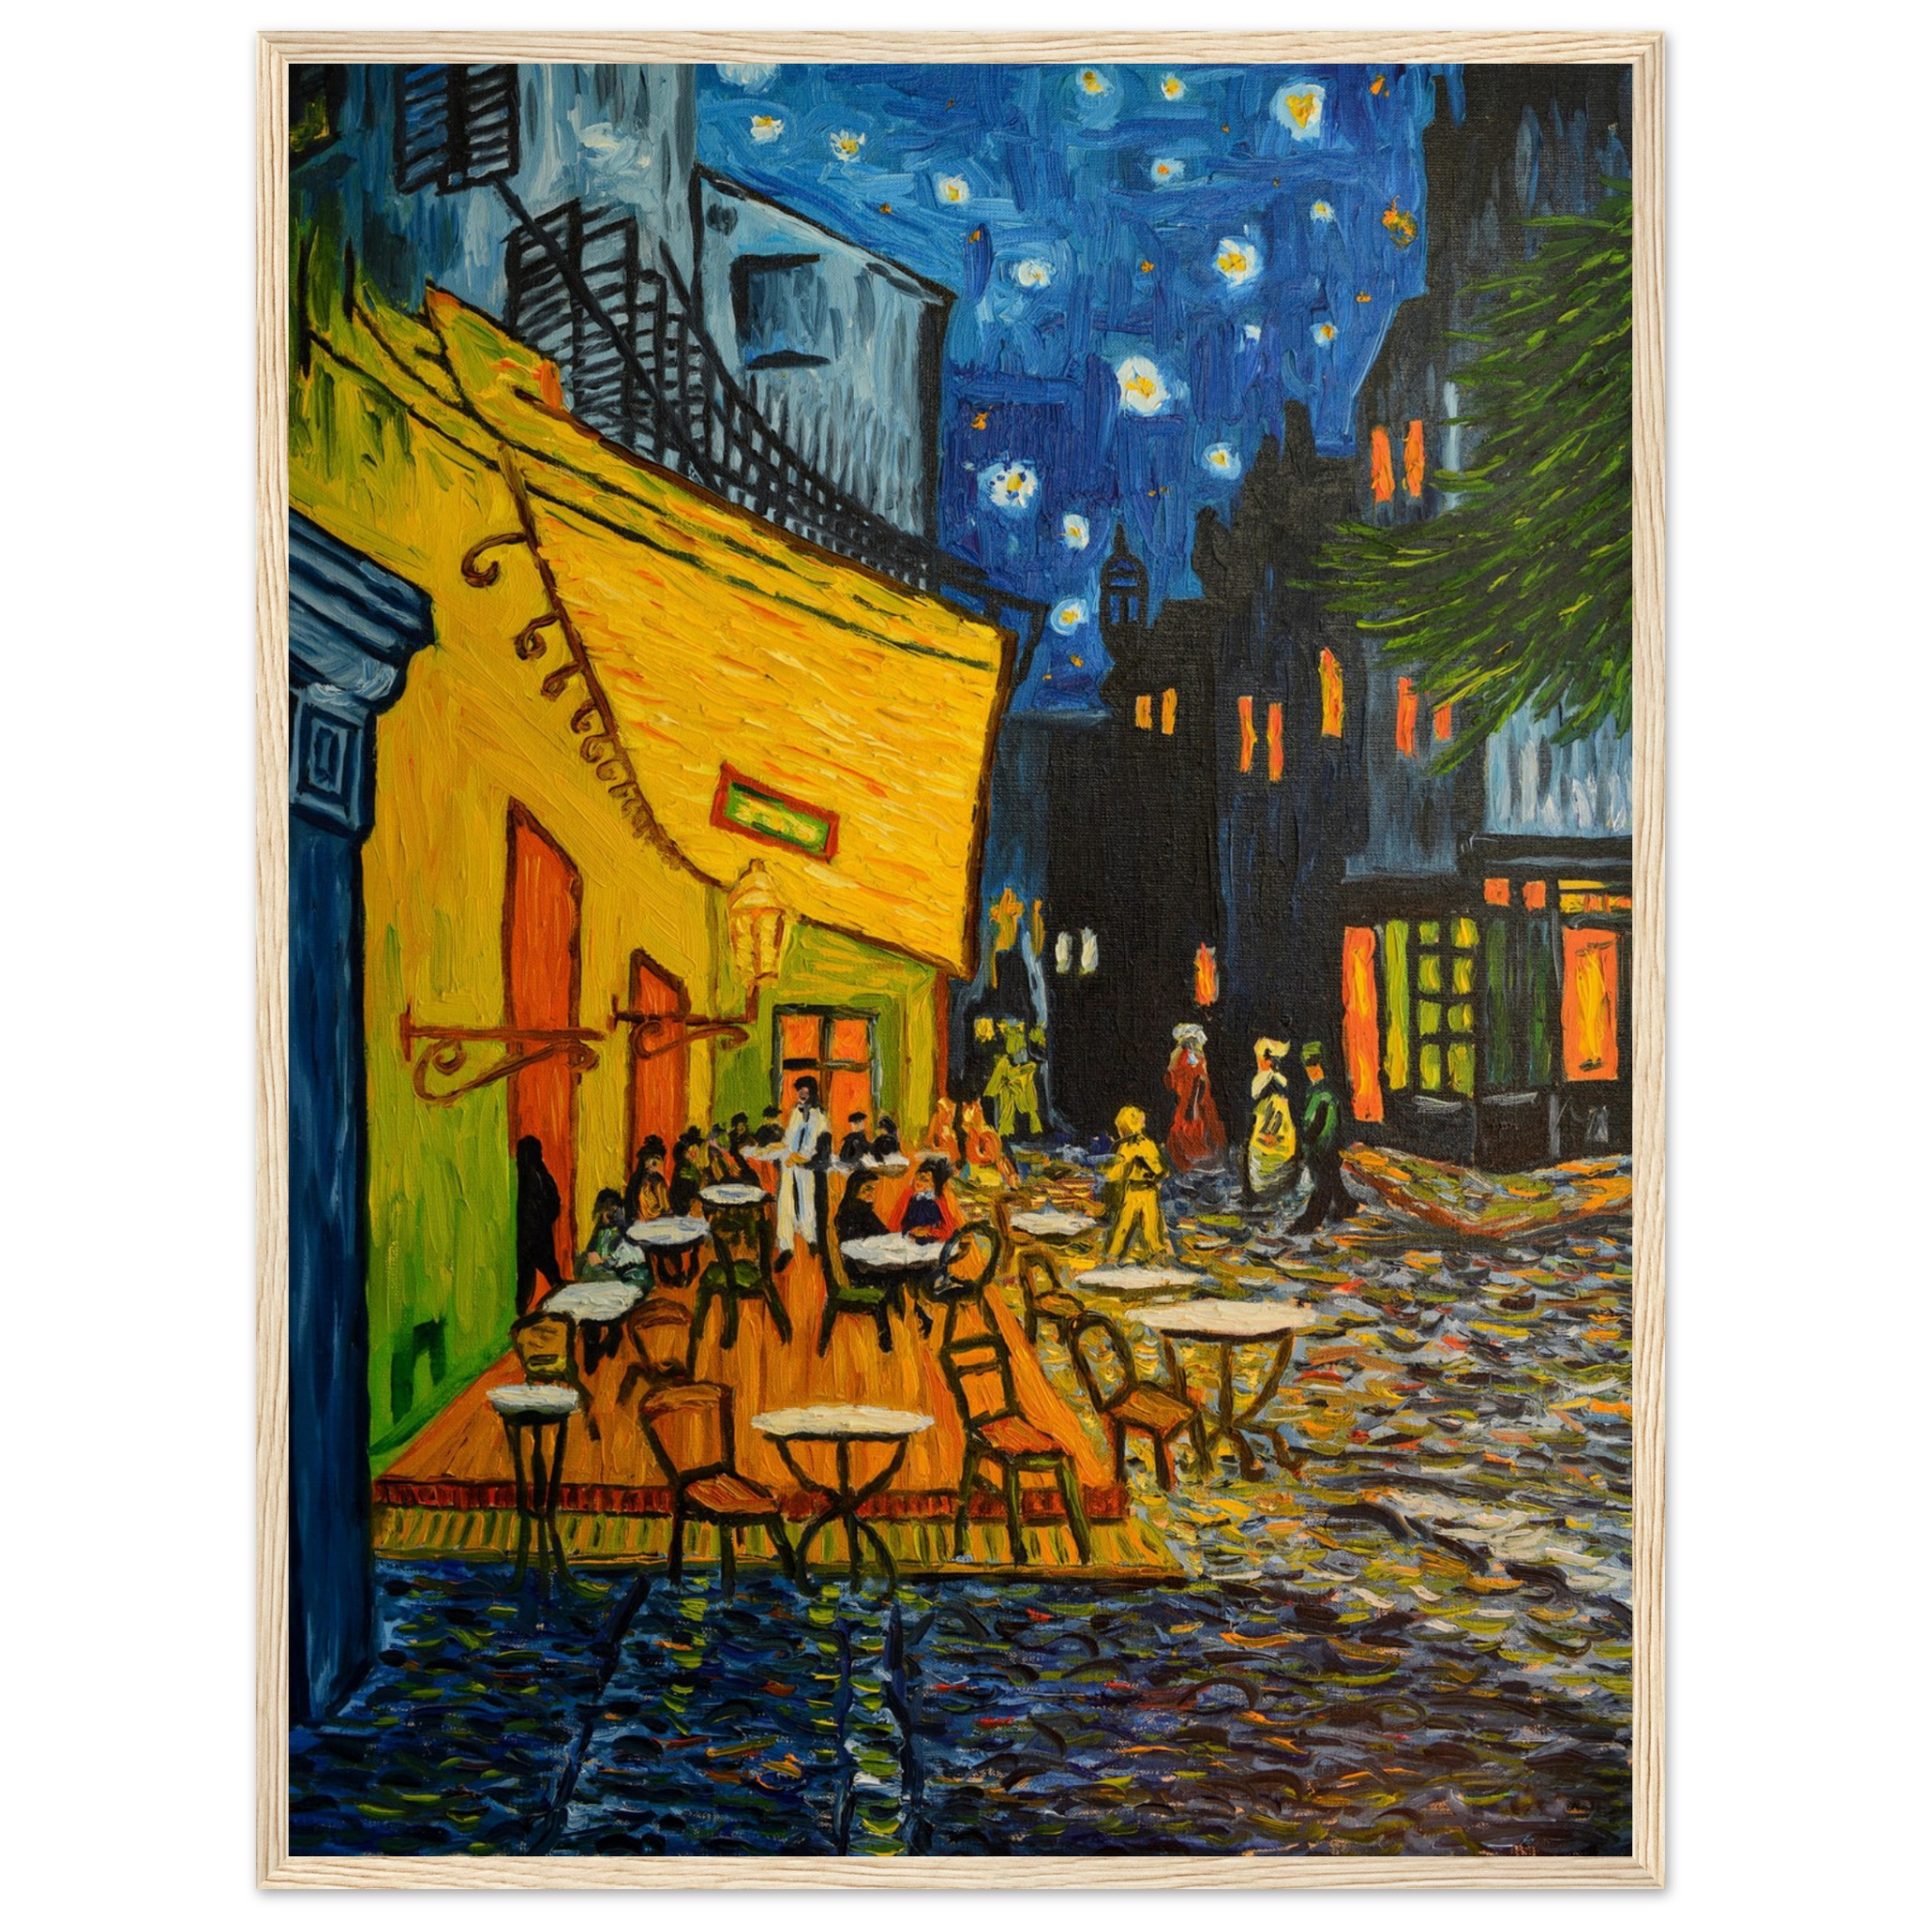 Cafe Terrace on Forum Square - Painting oil on canvas